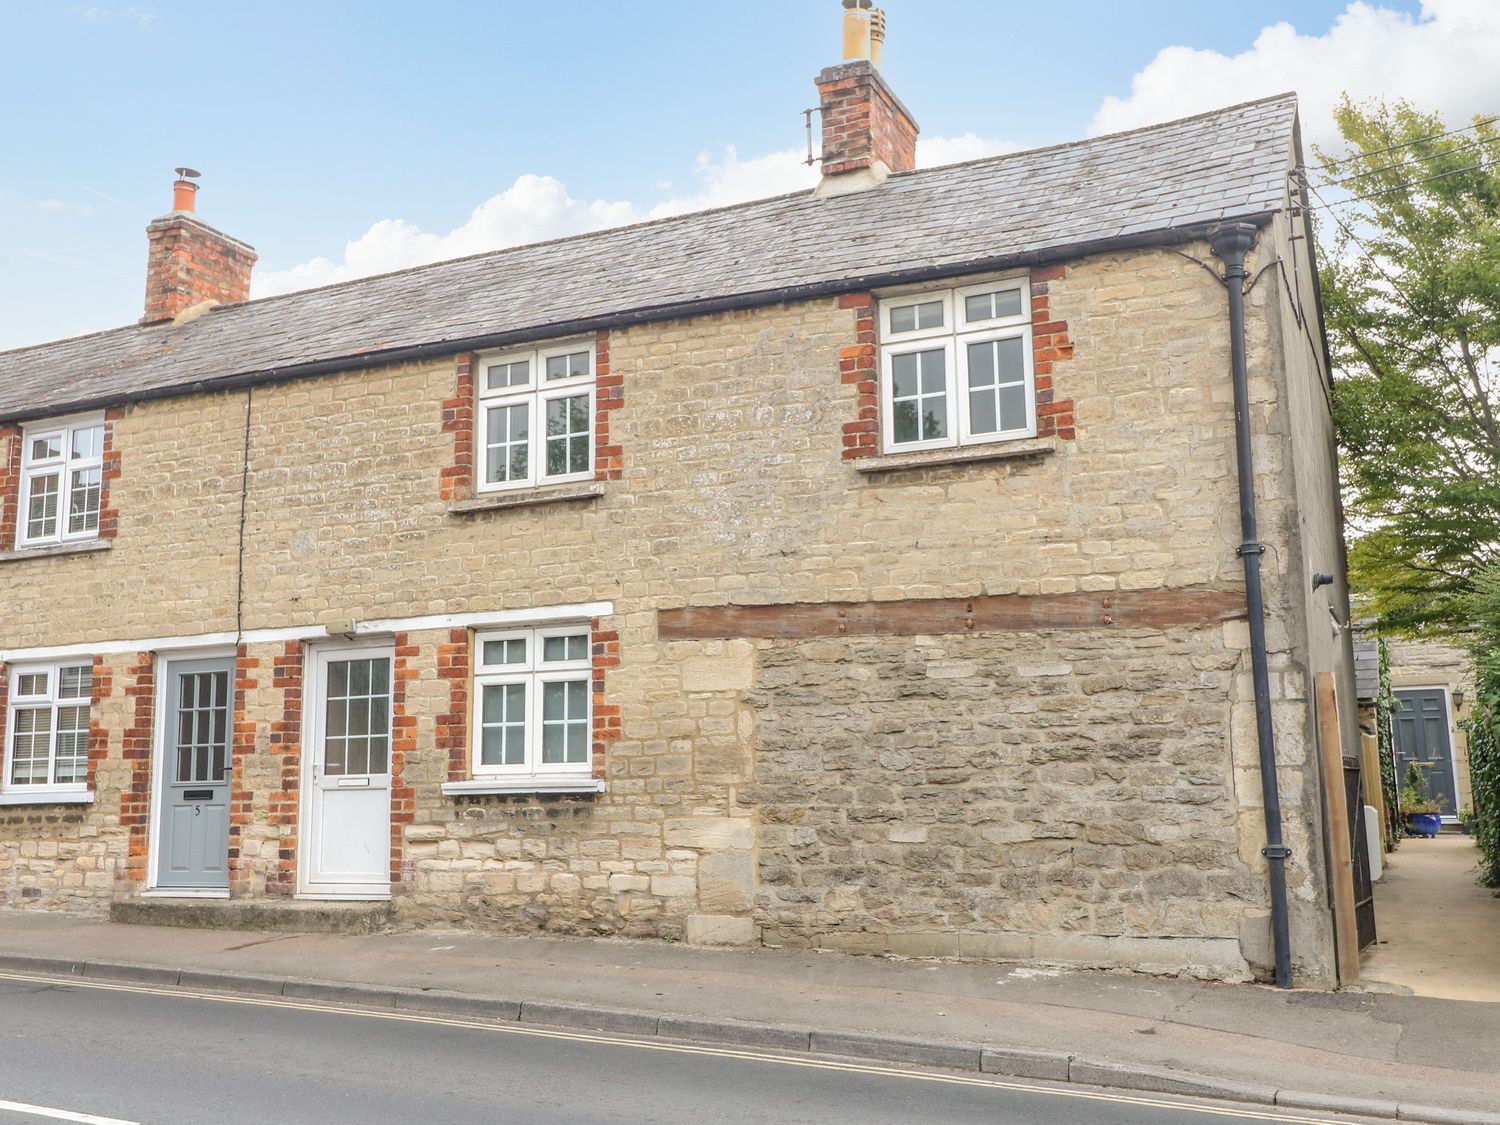 Holiday Cottages in Gloucestershire: Halfpenny Cottage, Lechlade | sykescottages.co.uk